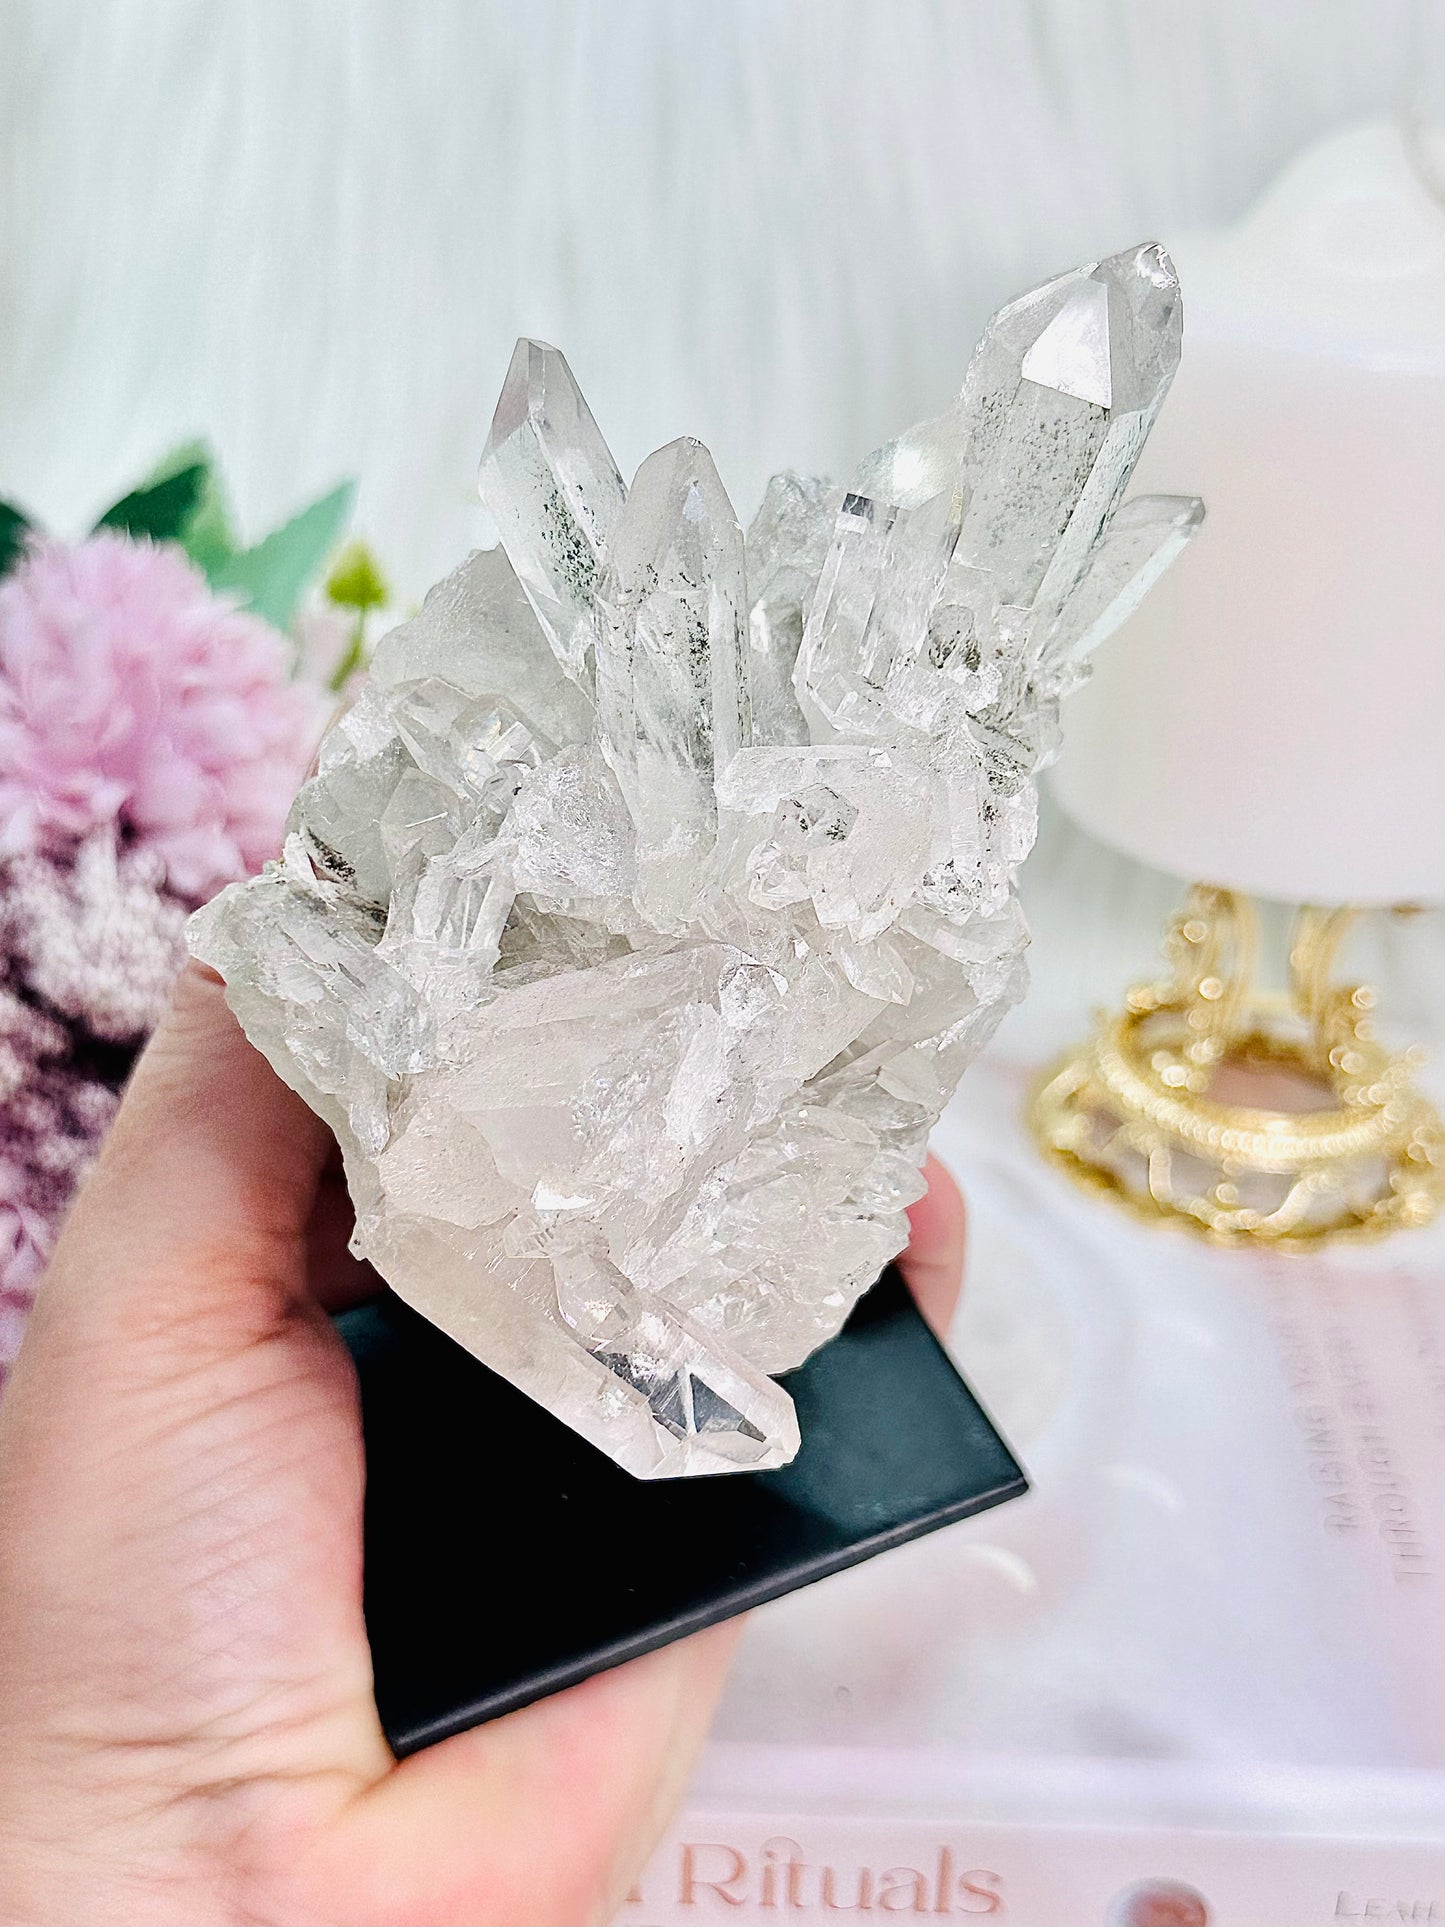 Simply Stunning Large 533gram Natural Clear Quartz Cluster with Phantom Inclusions From Brazil